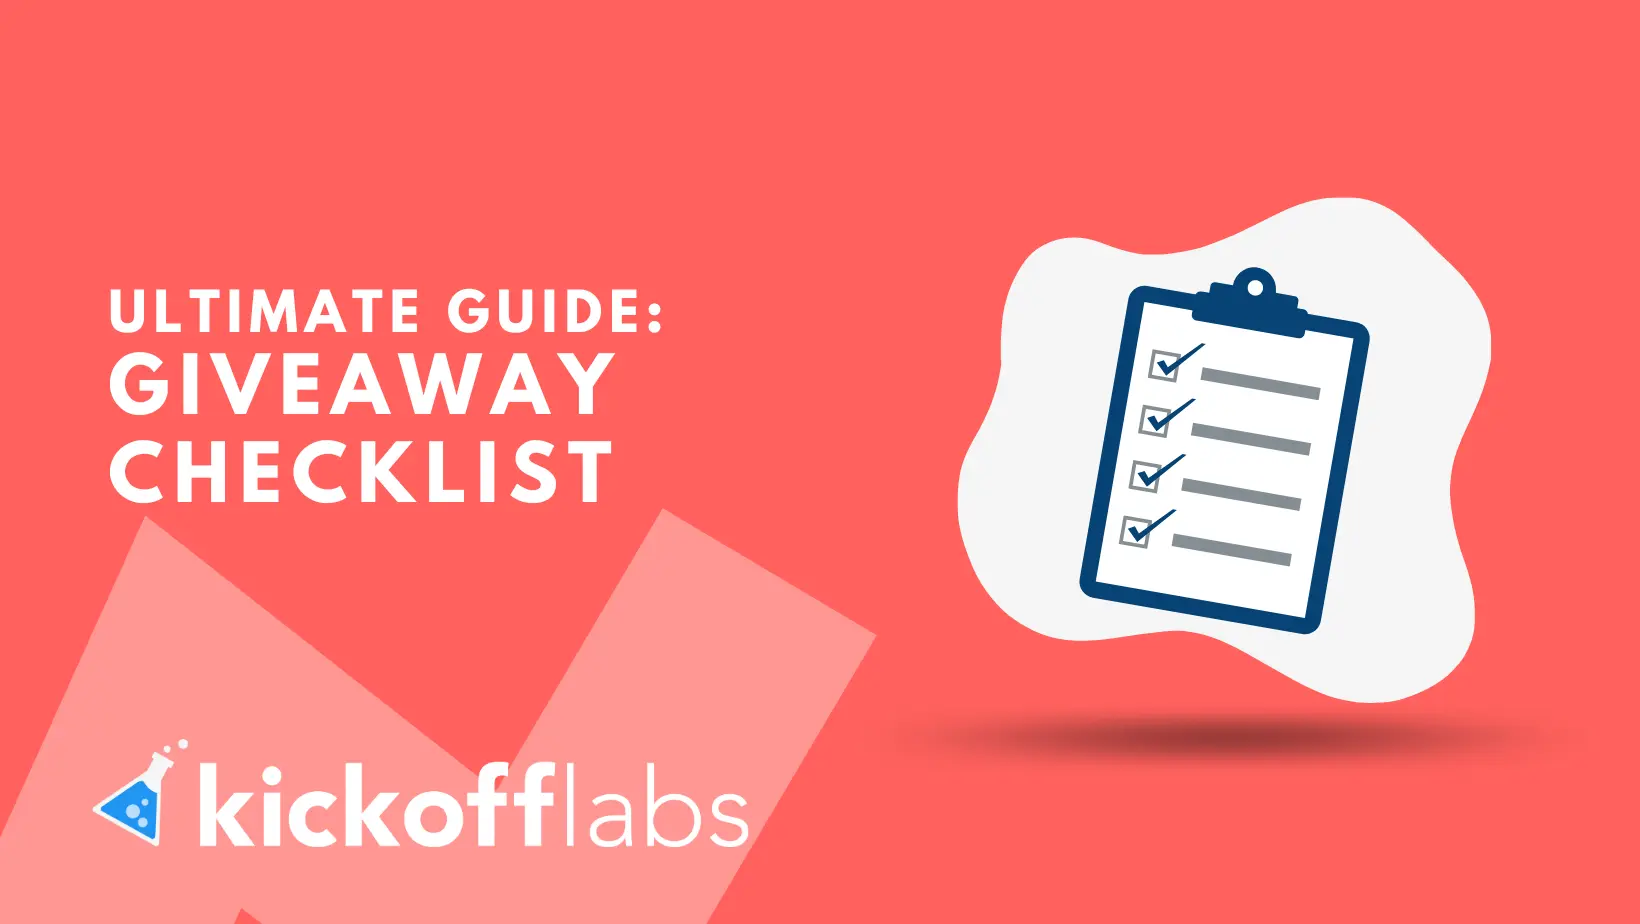 Launch Giveaways Faster With this Quick and Easy Checklist